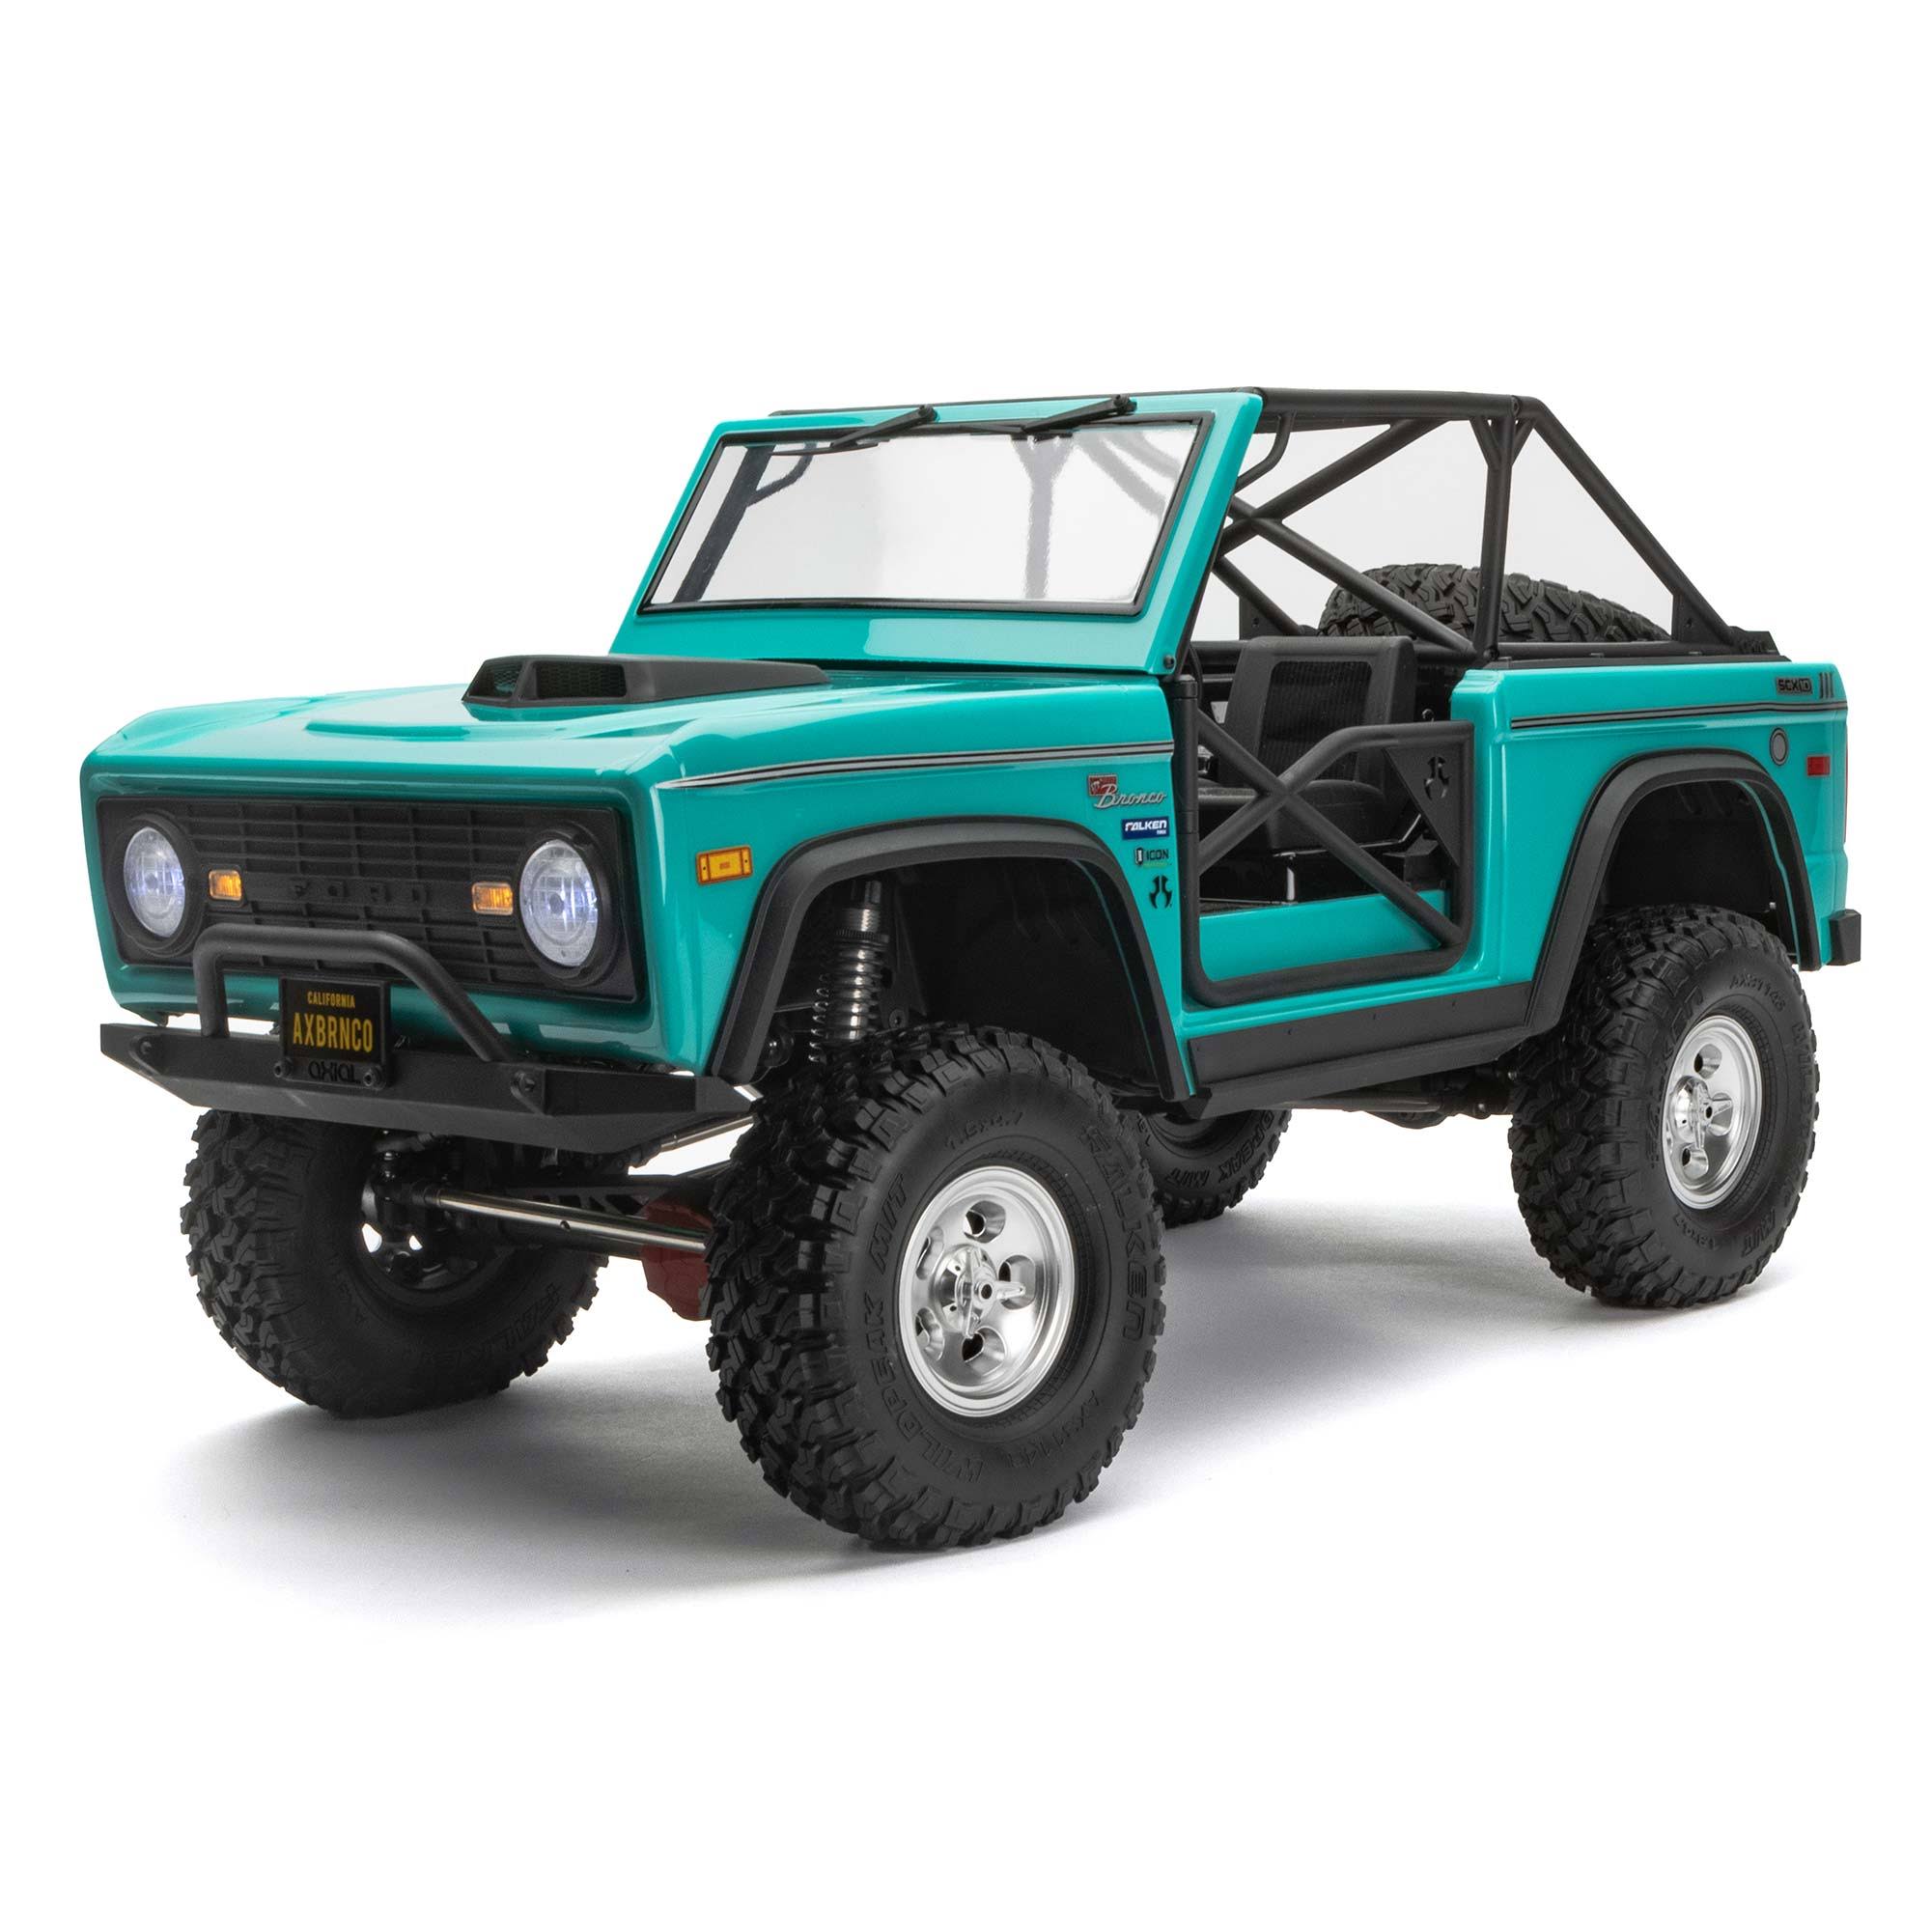 Axial Scx10 III Early Ford Bronco RC Crawler (Turquoise) AXI03014T1